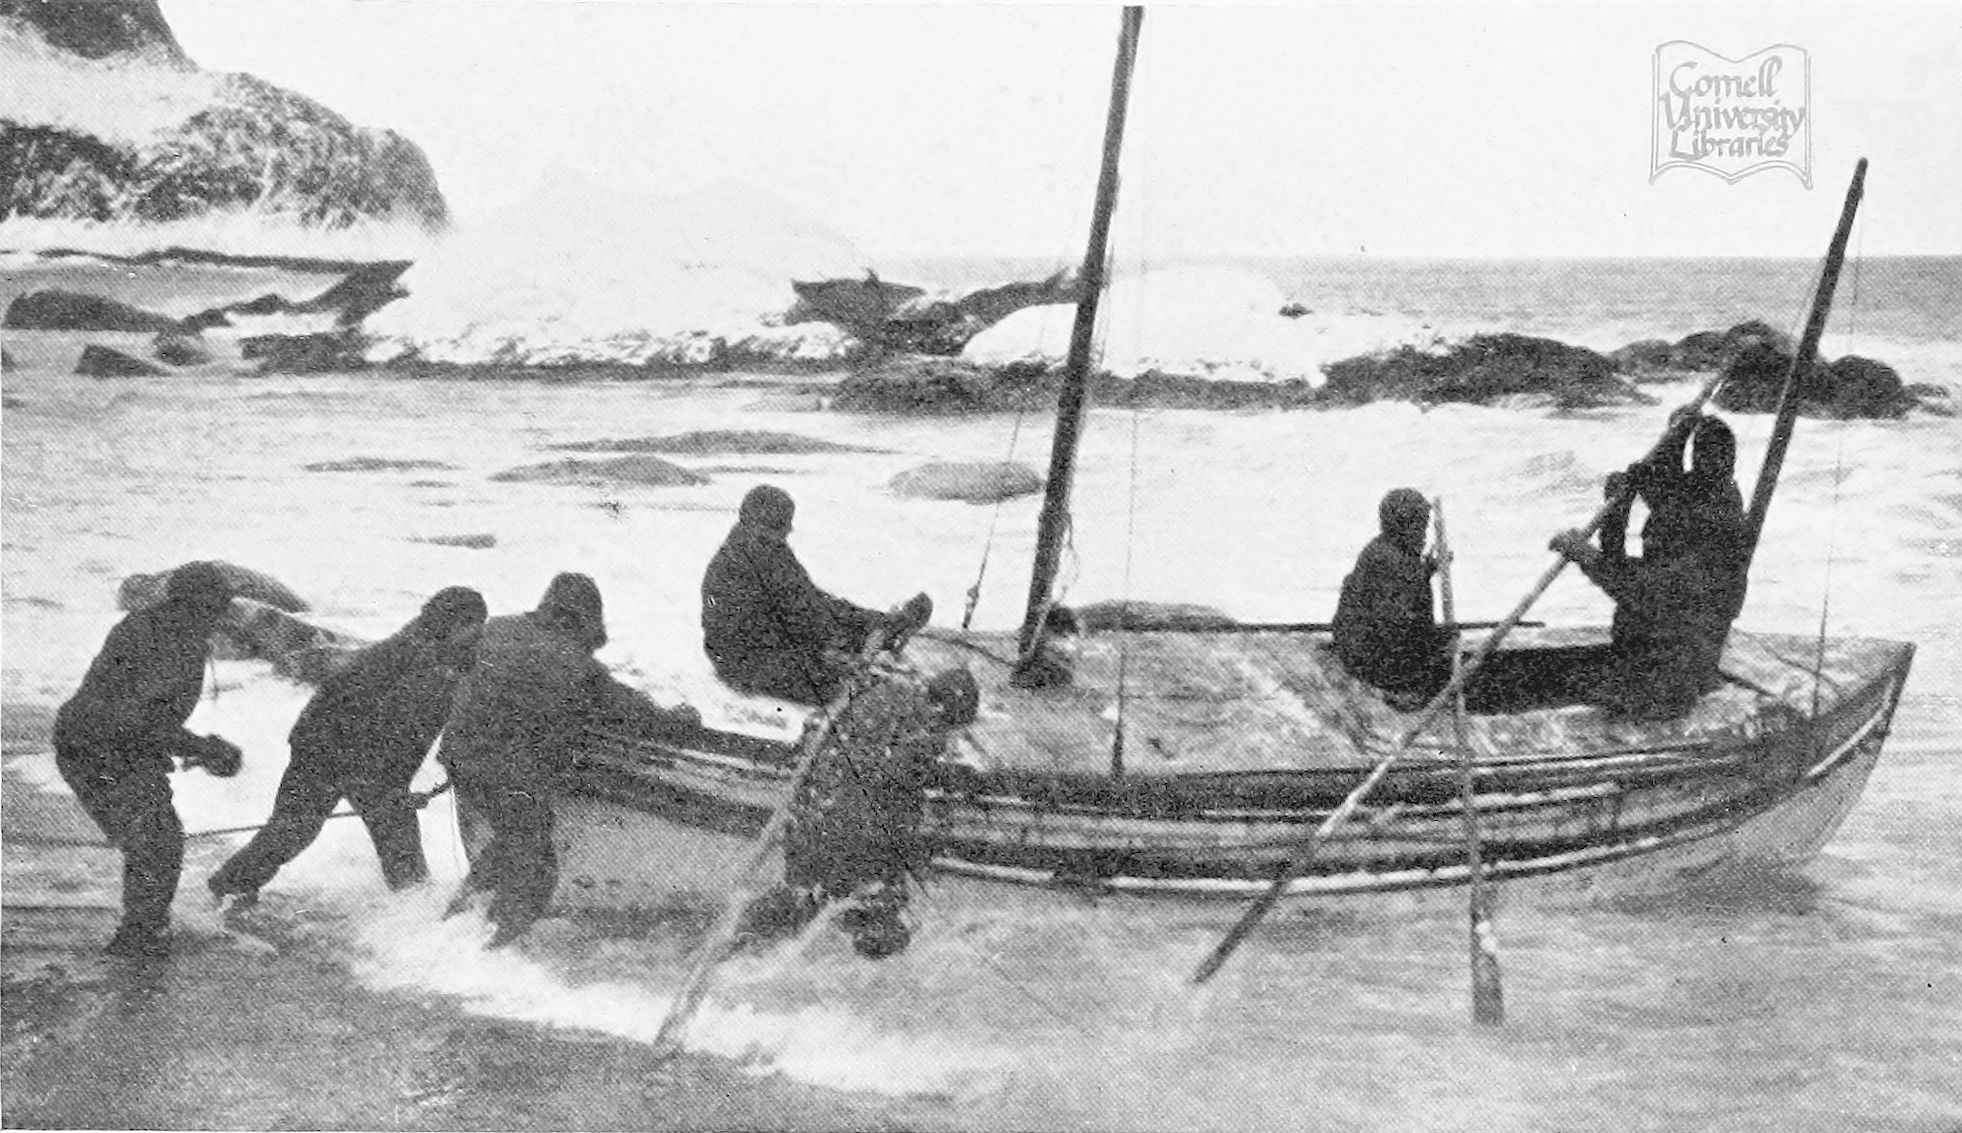 Launching of the James Caird